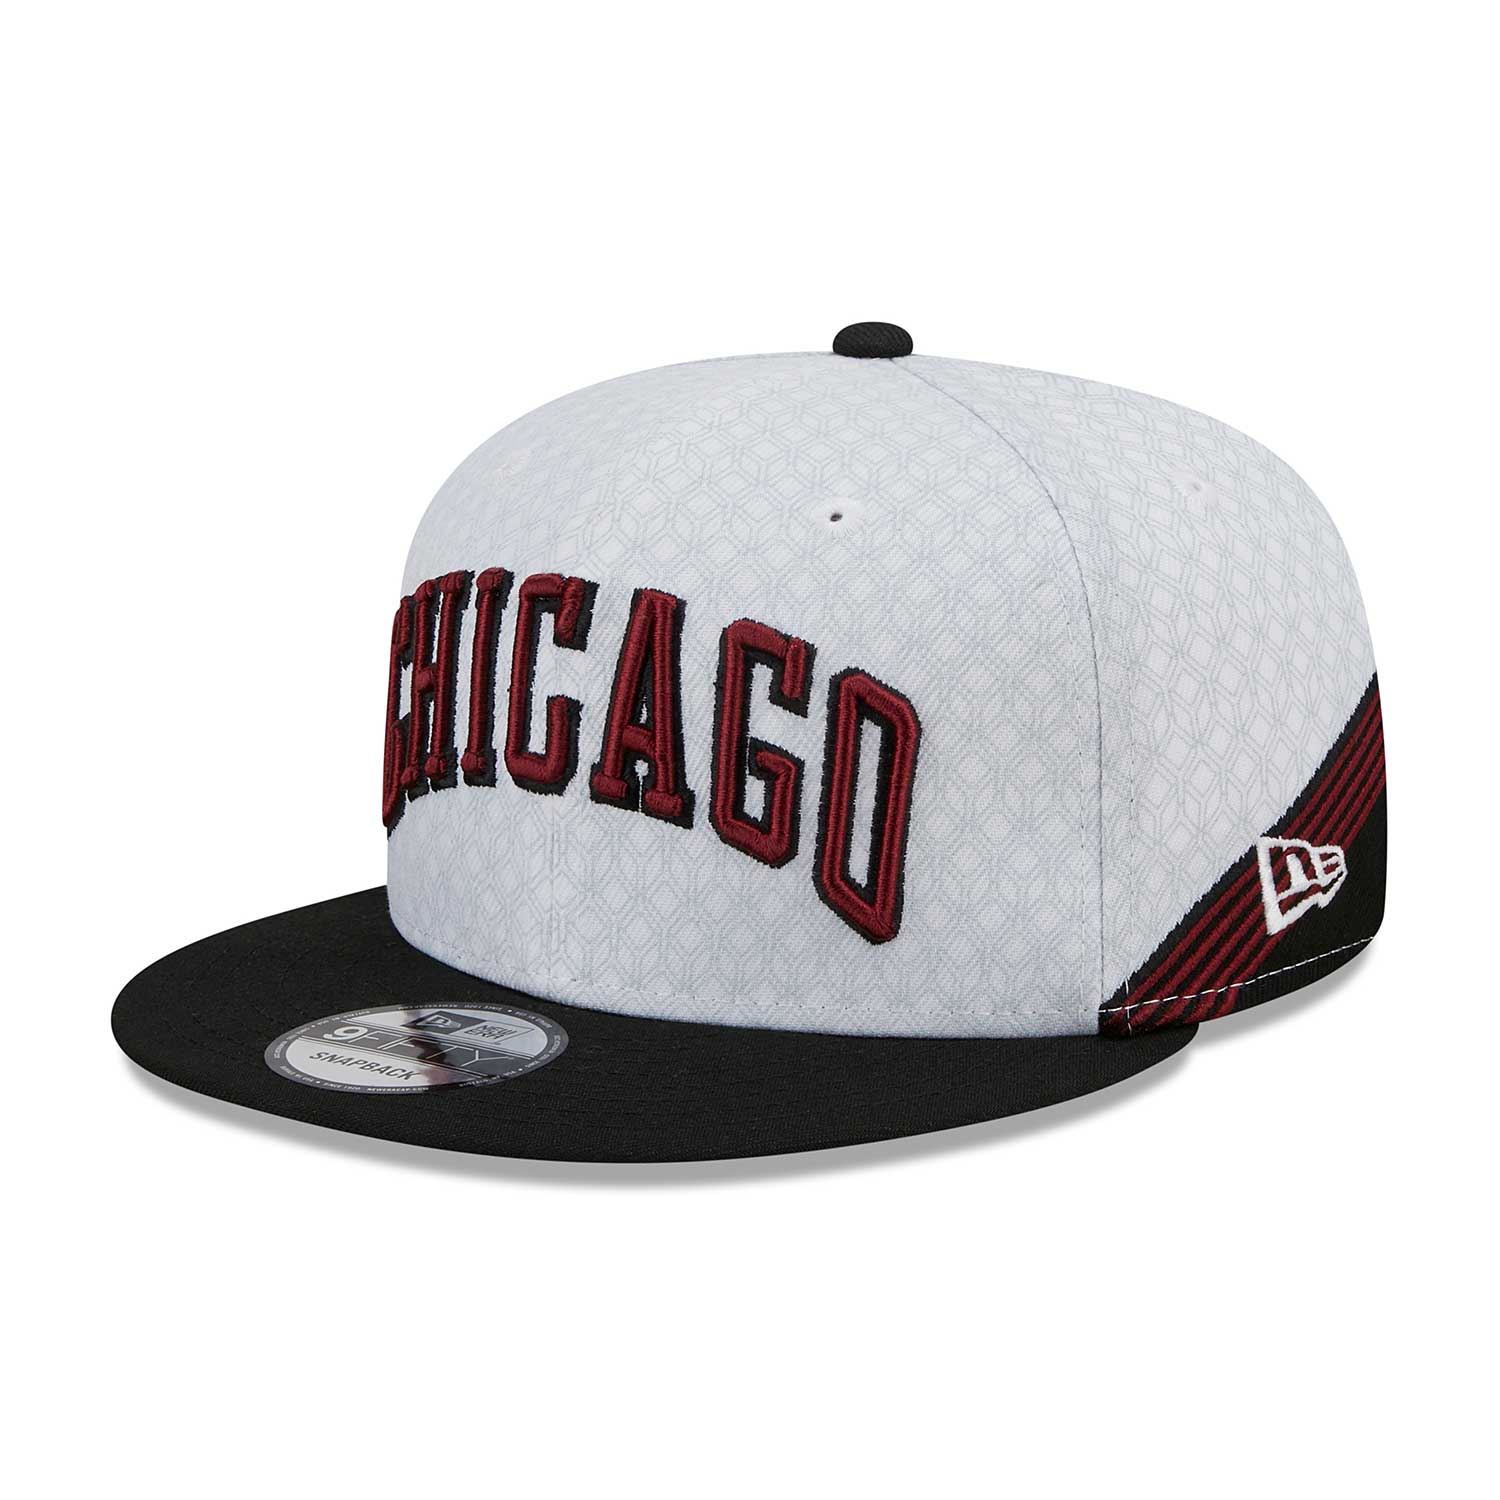 Chicago White Sox City Connect 9FIFTY Snapback Hat, Black, by New Era